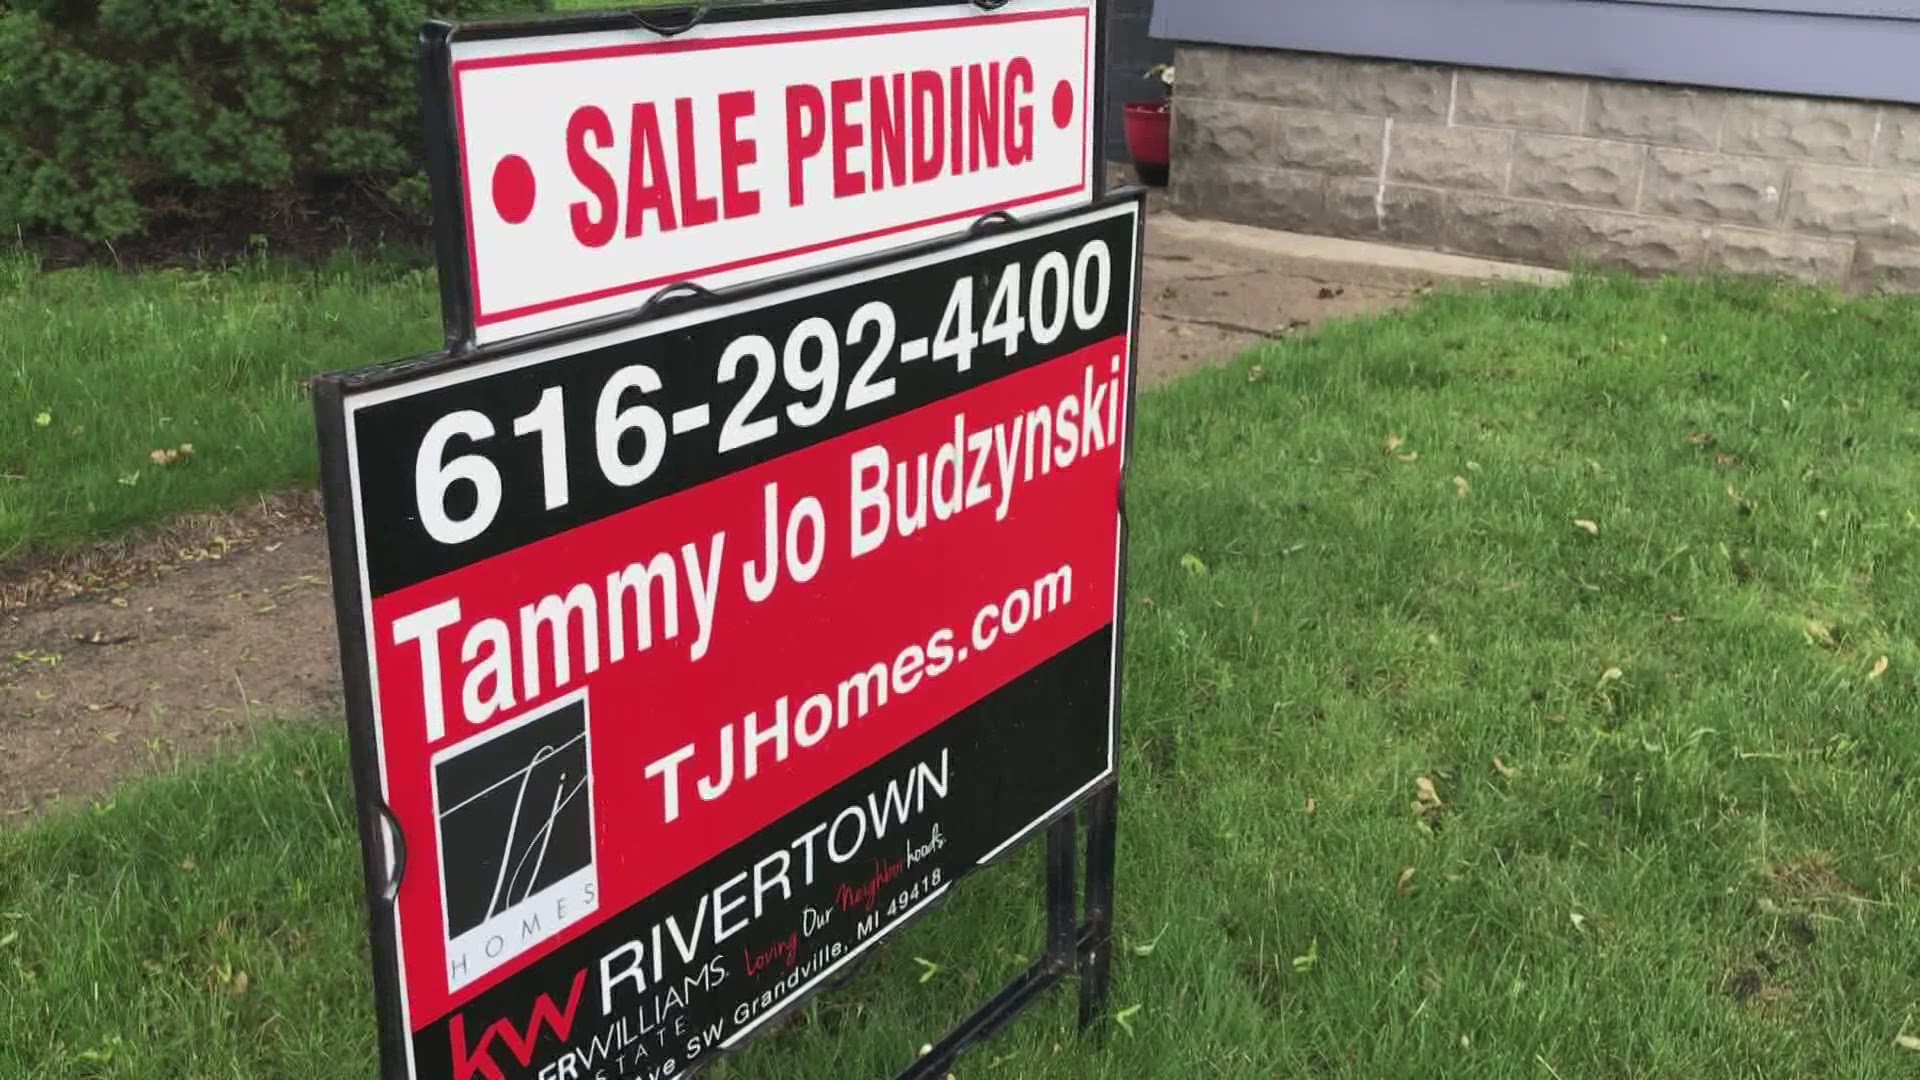 If you hear the faint sound of celebration, that’s the Michigan real estate industry happy to once again be able to show homes.